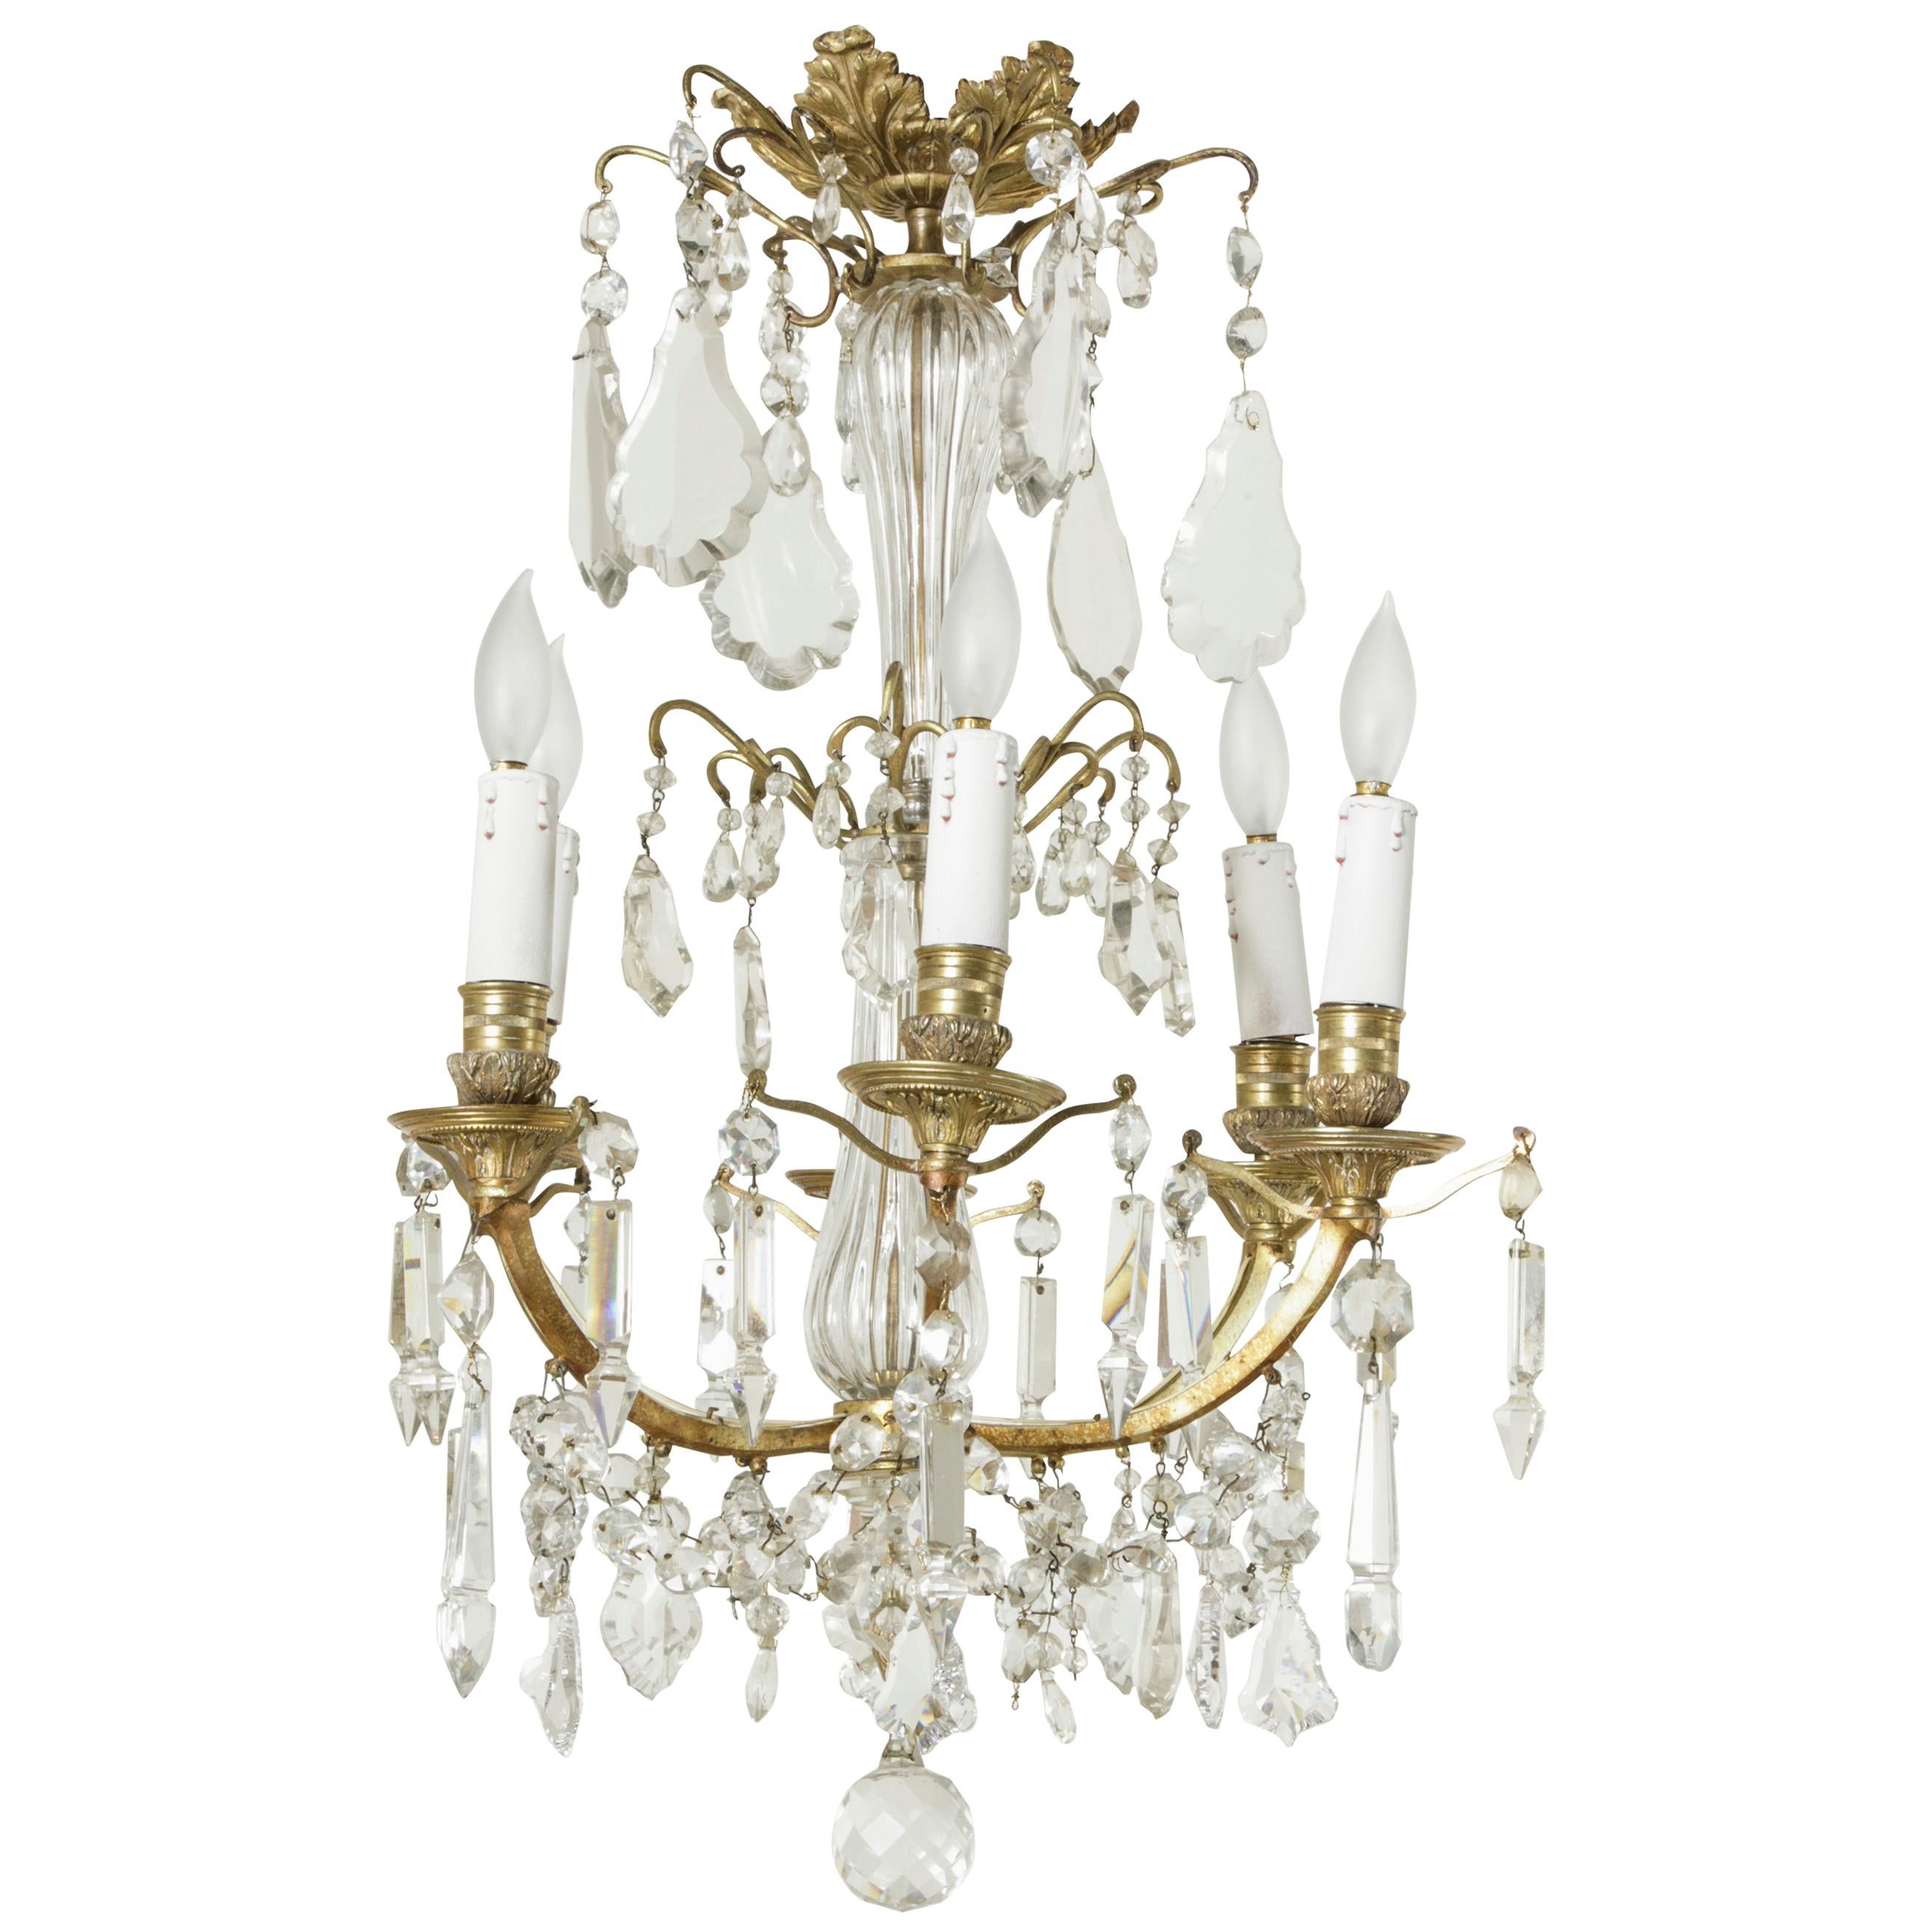 19th Century French Gilt Bronze snd Crystal Chandelier with Six Arms For Sale